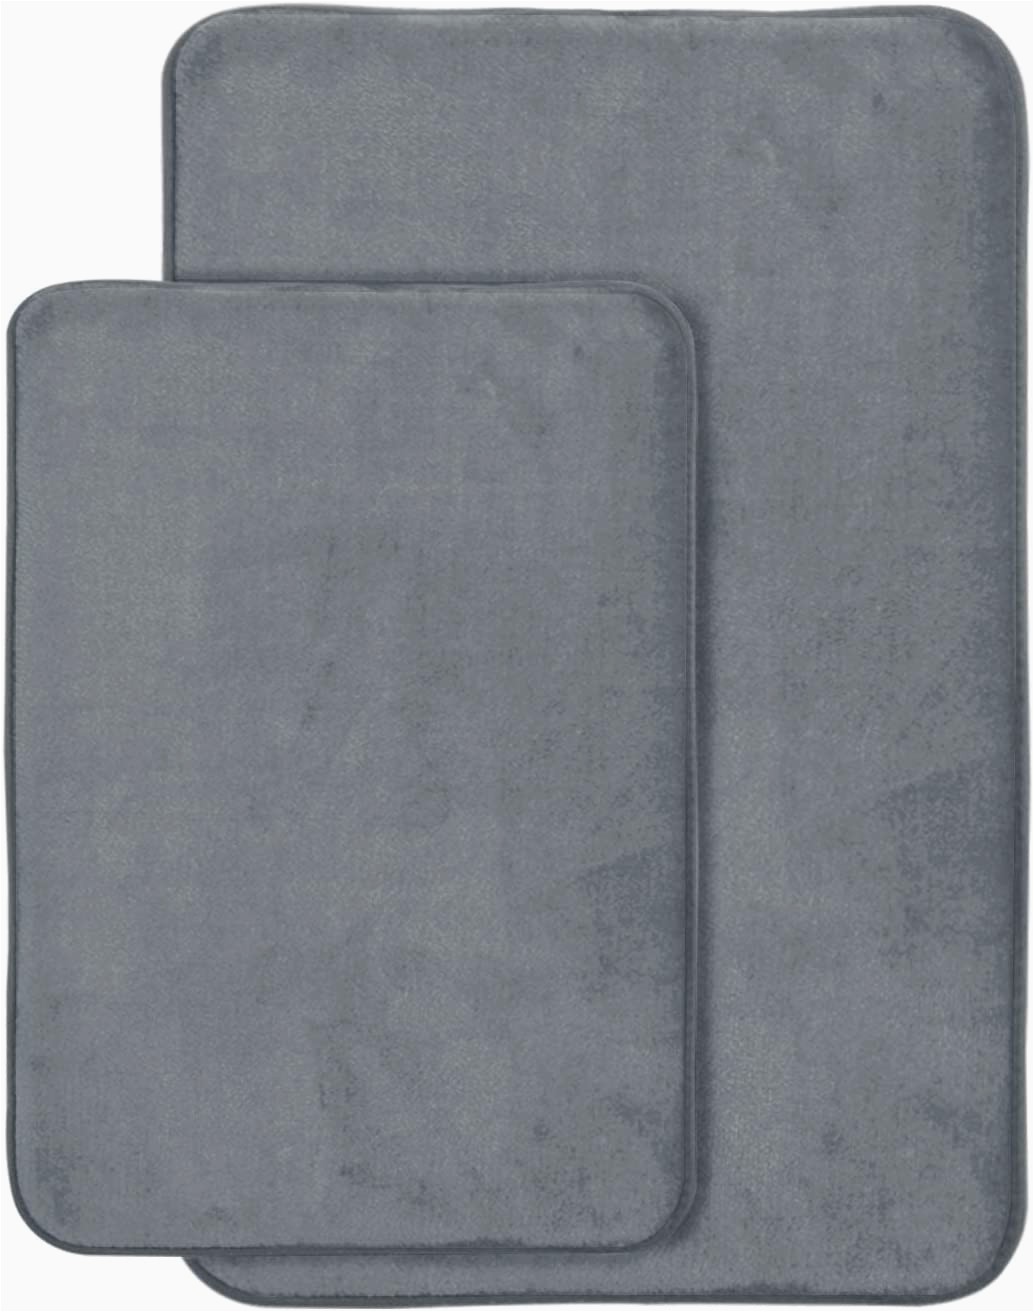 Bathroom Memory Foam Rug Sets Aoacreations Non Slip Memory Foam Bathroom Bath Mat Rug 2 Piece Set Includes 1 20" X 32" and 1 Small 17" X 24" Grey